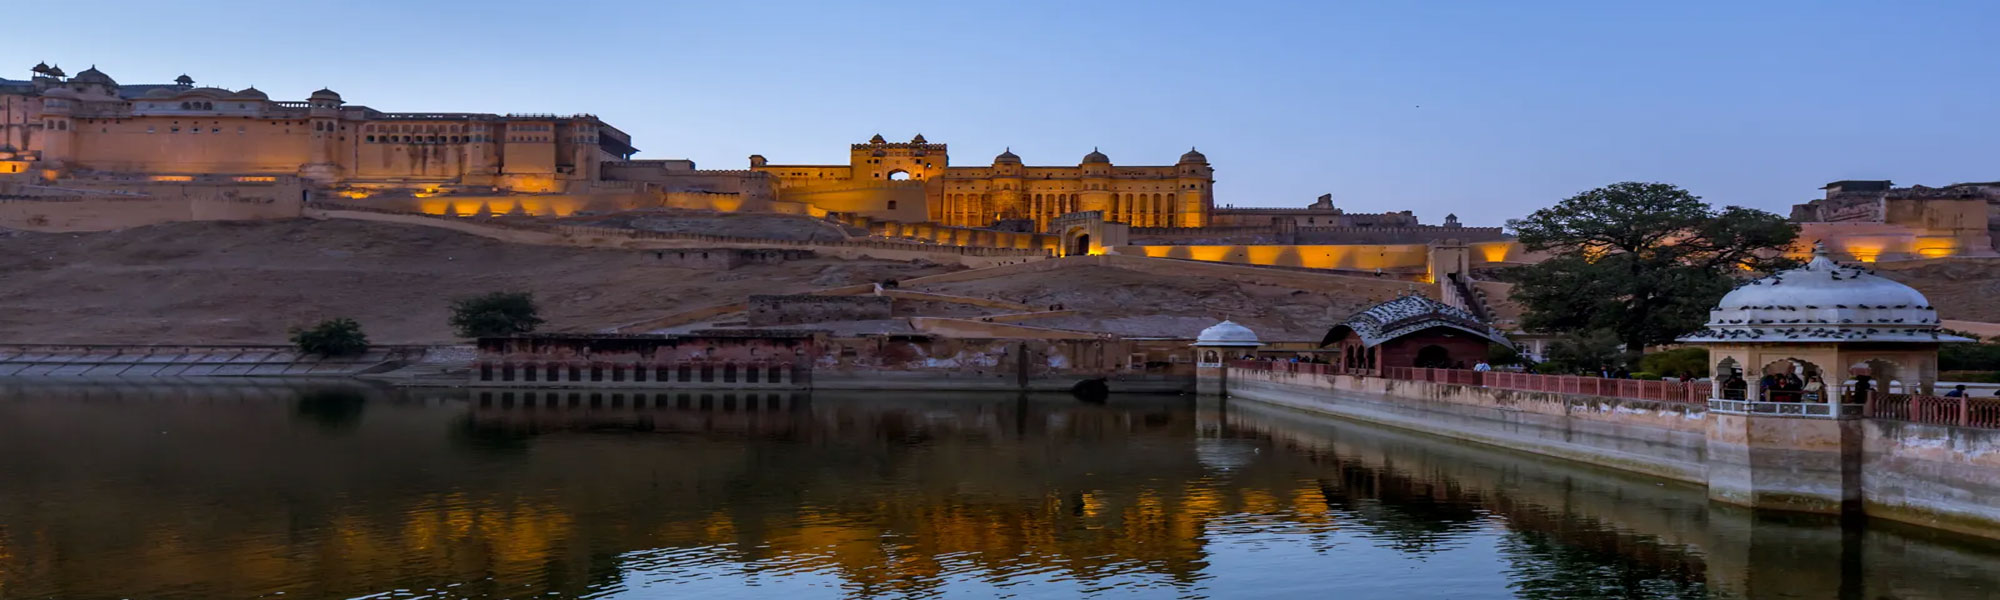 Golden Triangle Tours in India with Desert Festival Tours in Rajasthan 